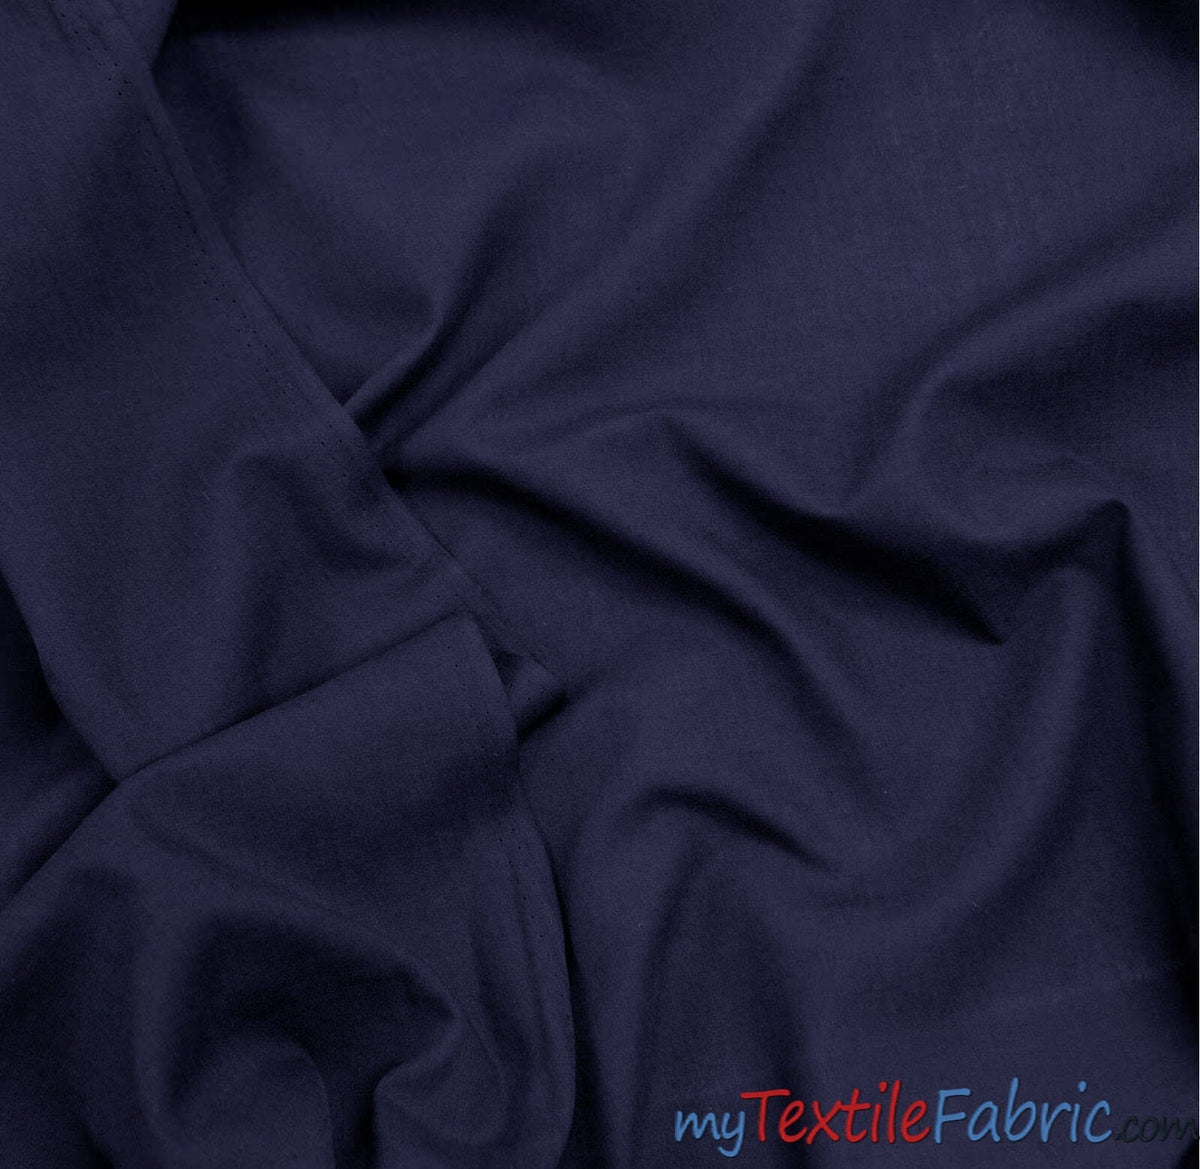 Plain 100% Cotton Fabric 150cm Wide Midweight 140gsm 60SQ Sewing